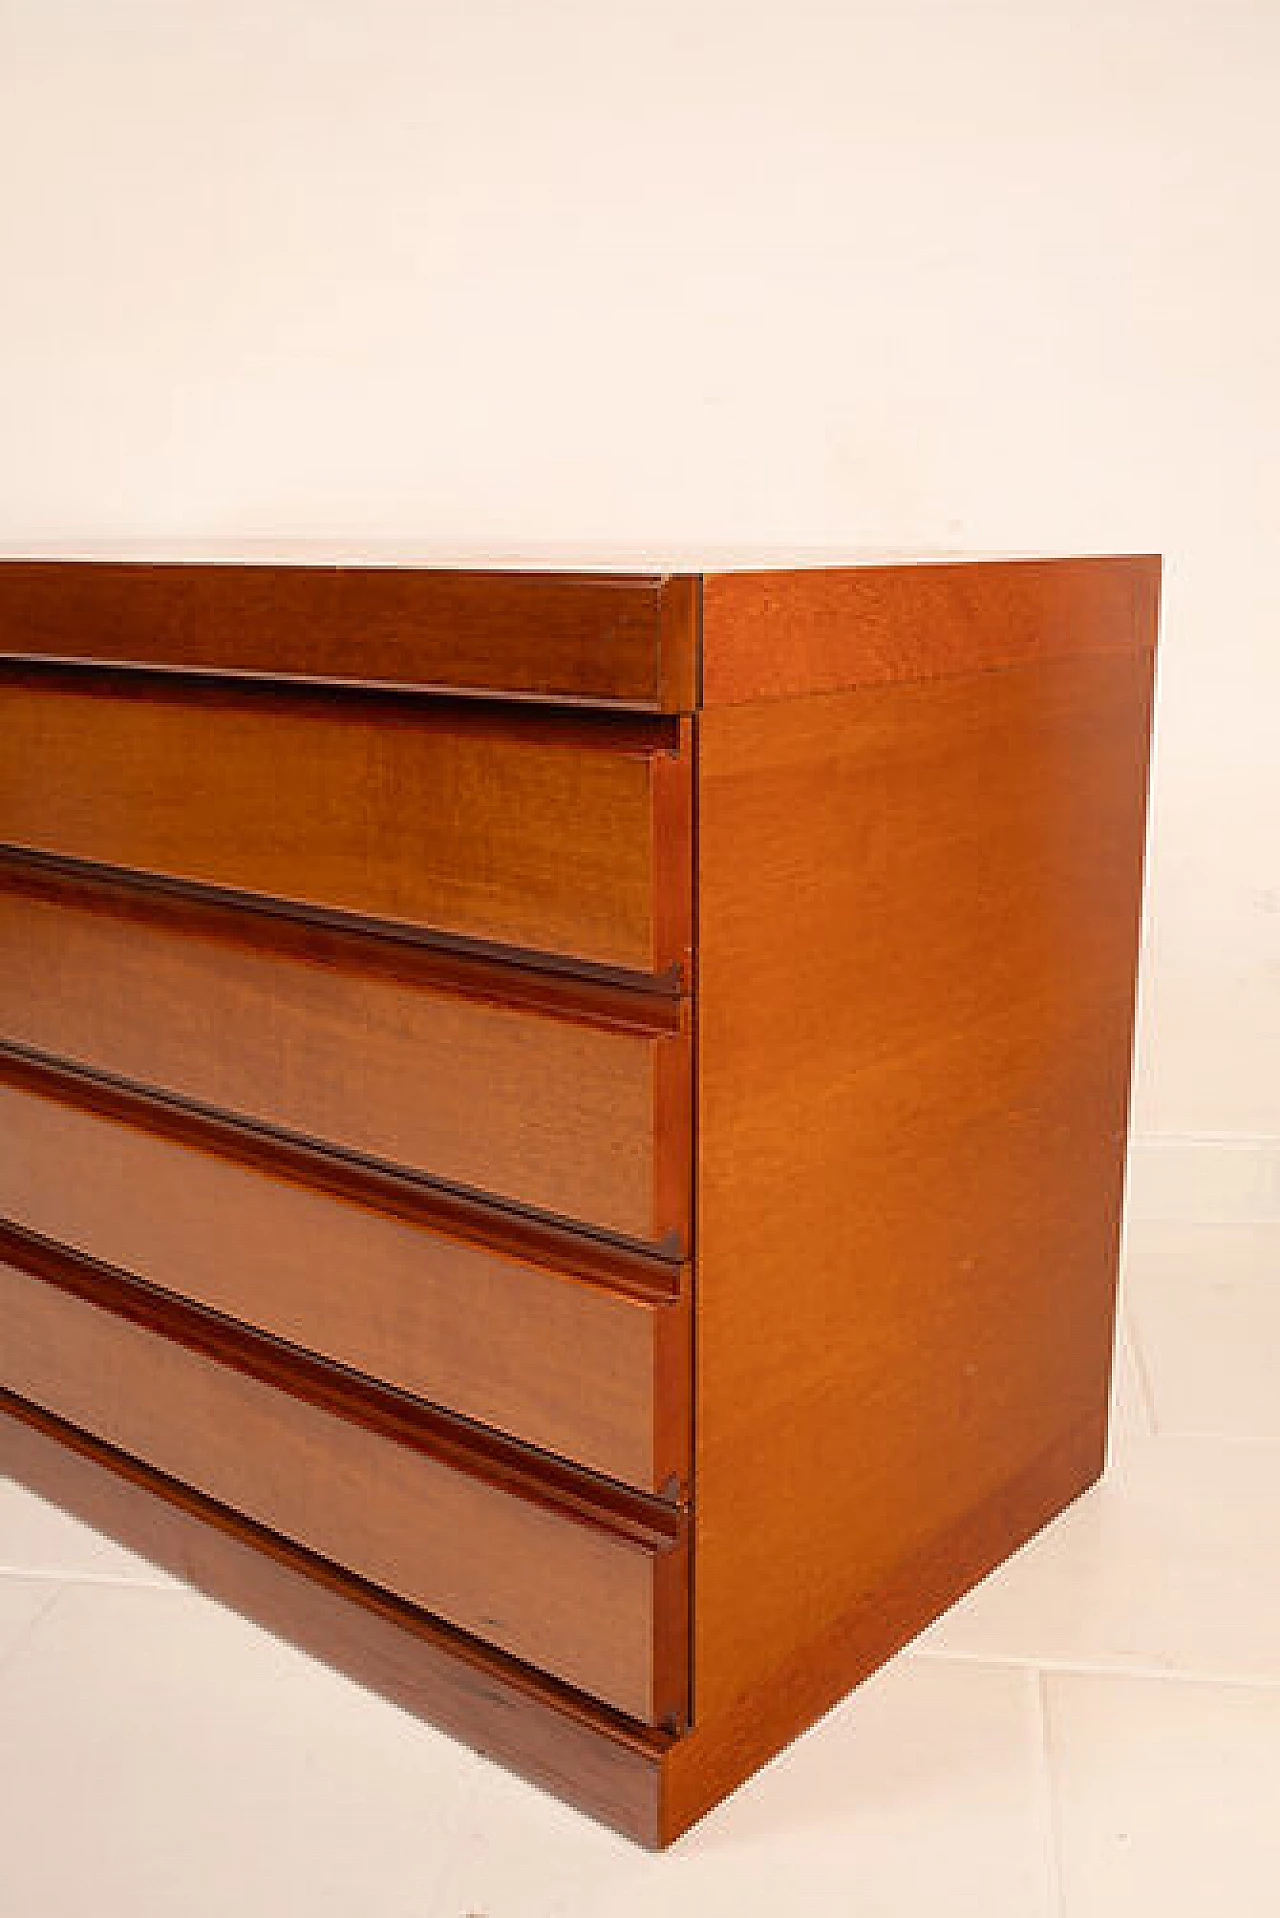 Programma S11 chest of drawers in walnut by Angelo Mangiarotti for Sorgente dei Mobili, 1970s 4